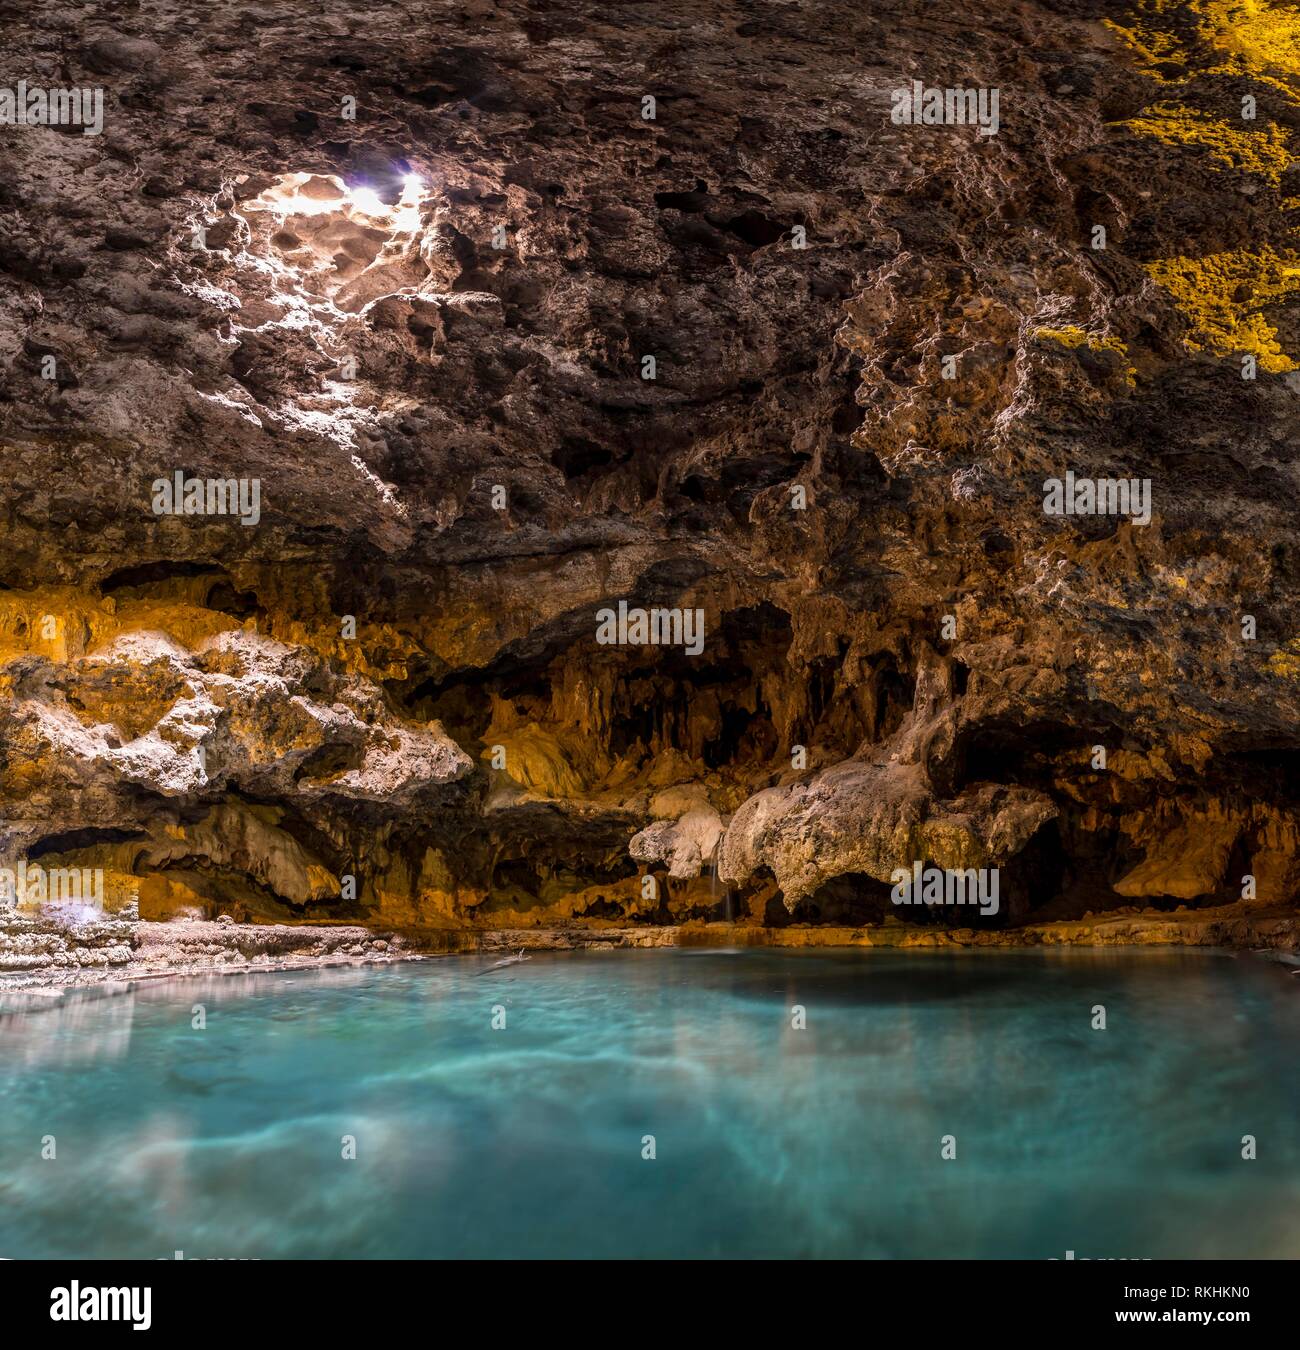 Cave with a geothermal spring, Cave and Basin National Historic Site, Banff National Park, Alberta, Canada Stock Photo